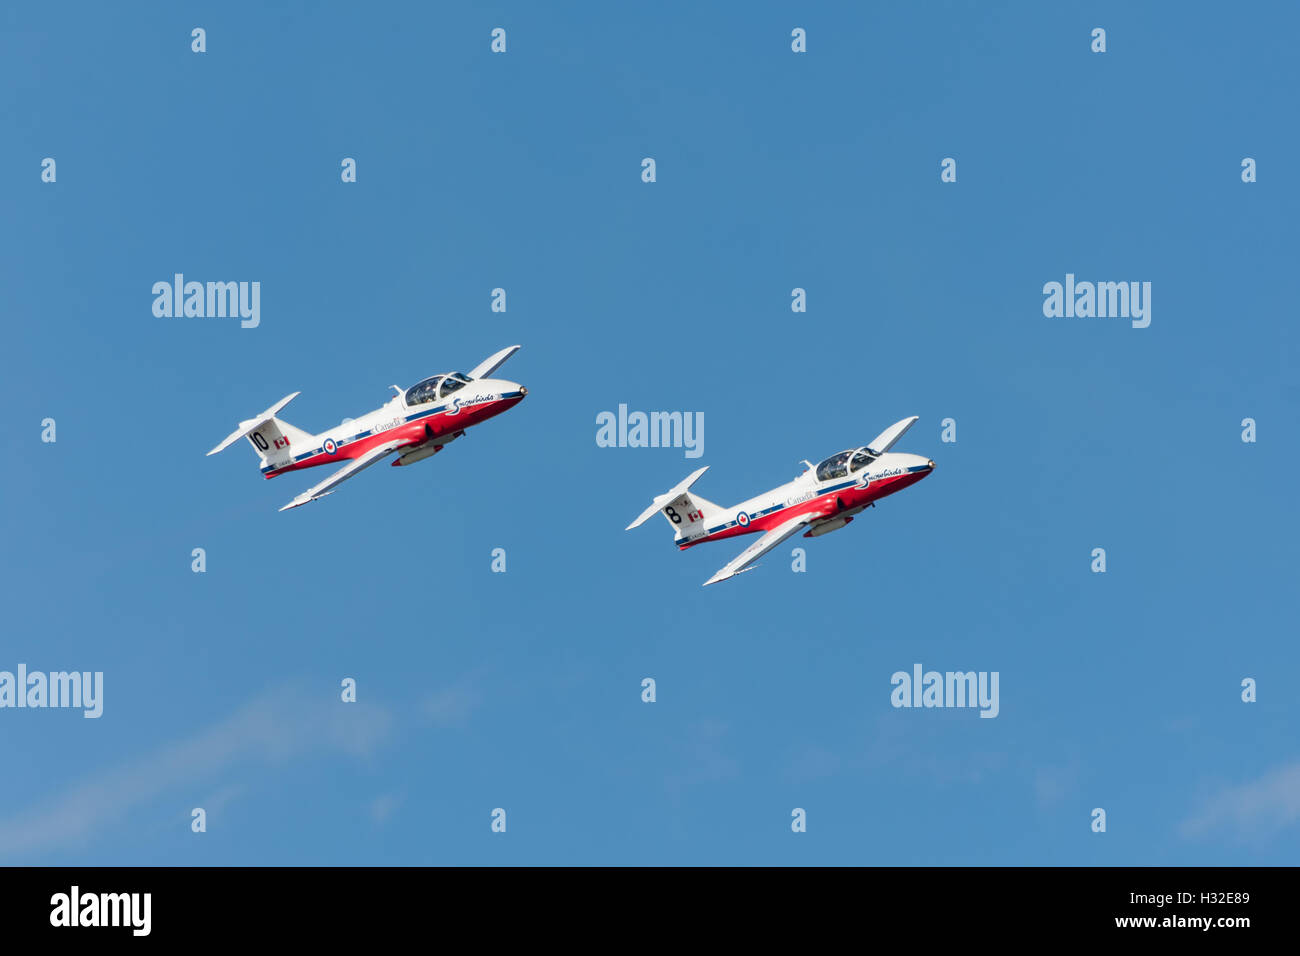 Canada SnowBirds 2 jets flying in formation Stock Photo